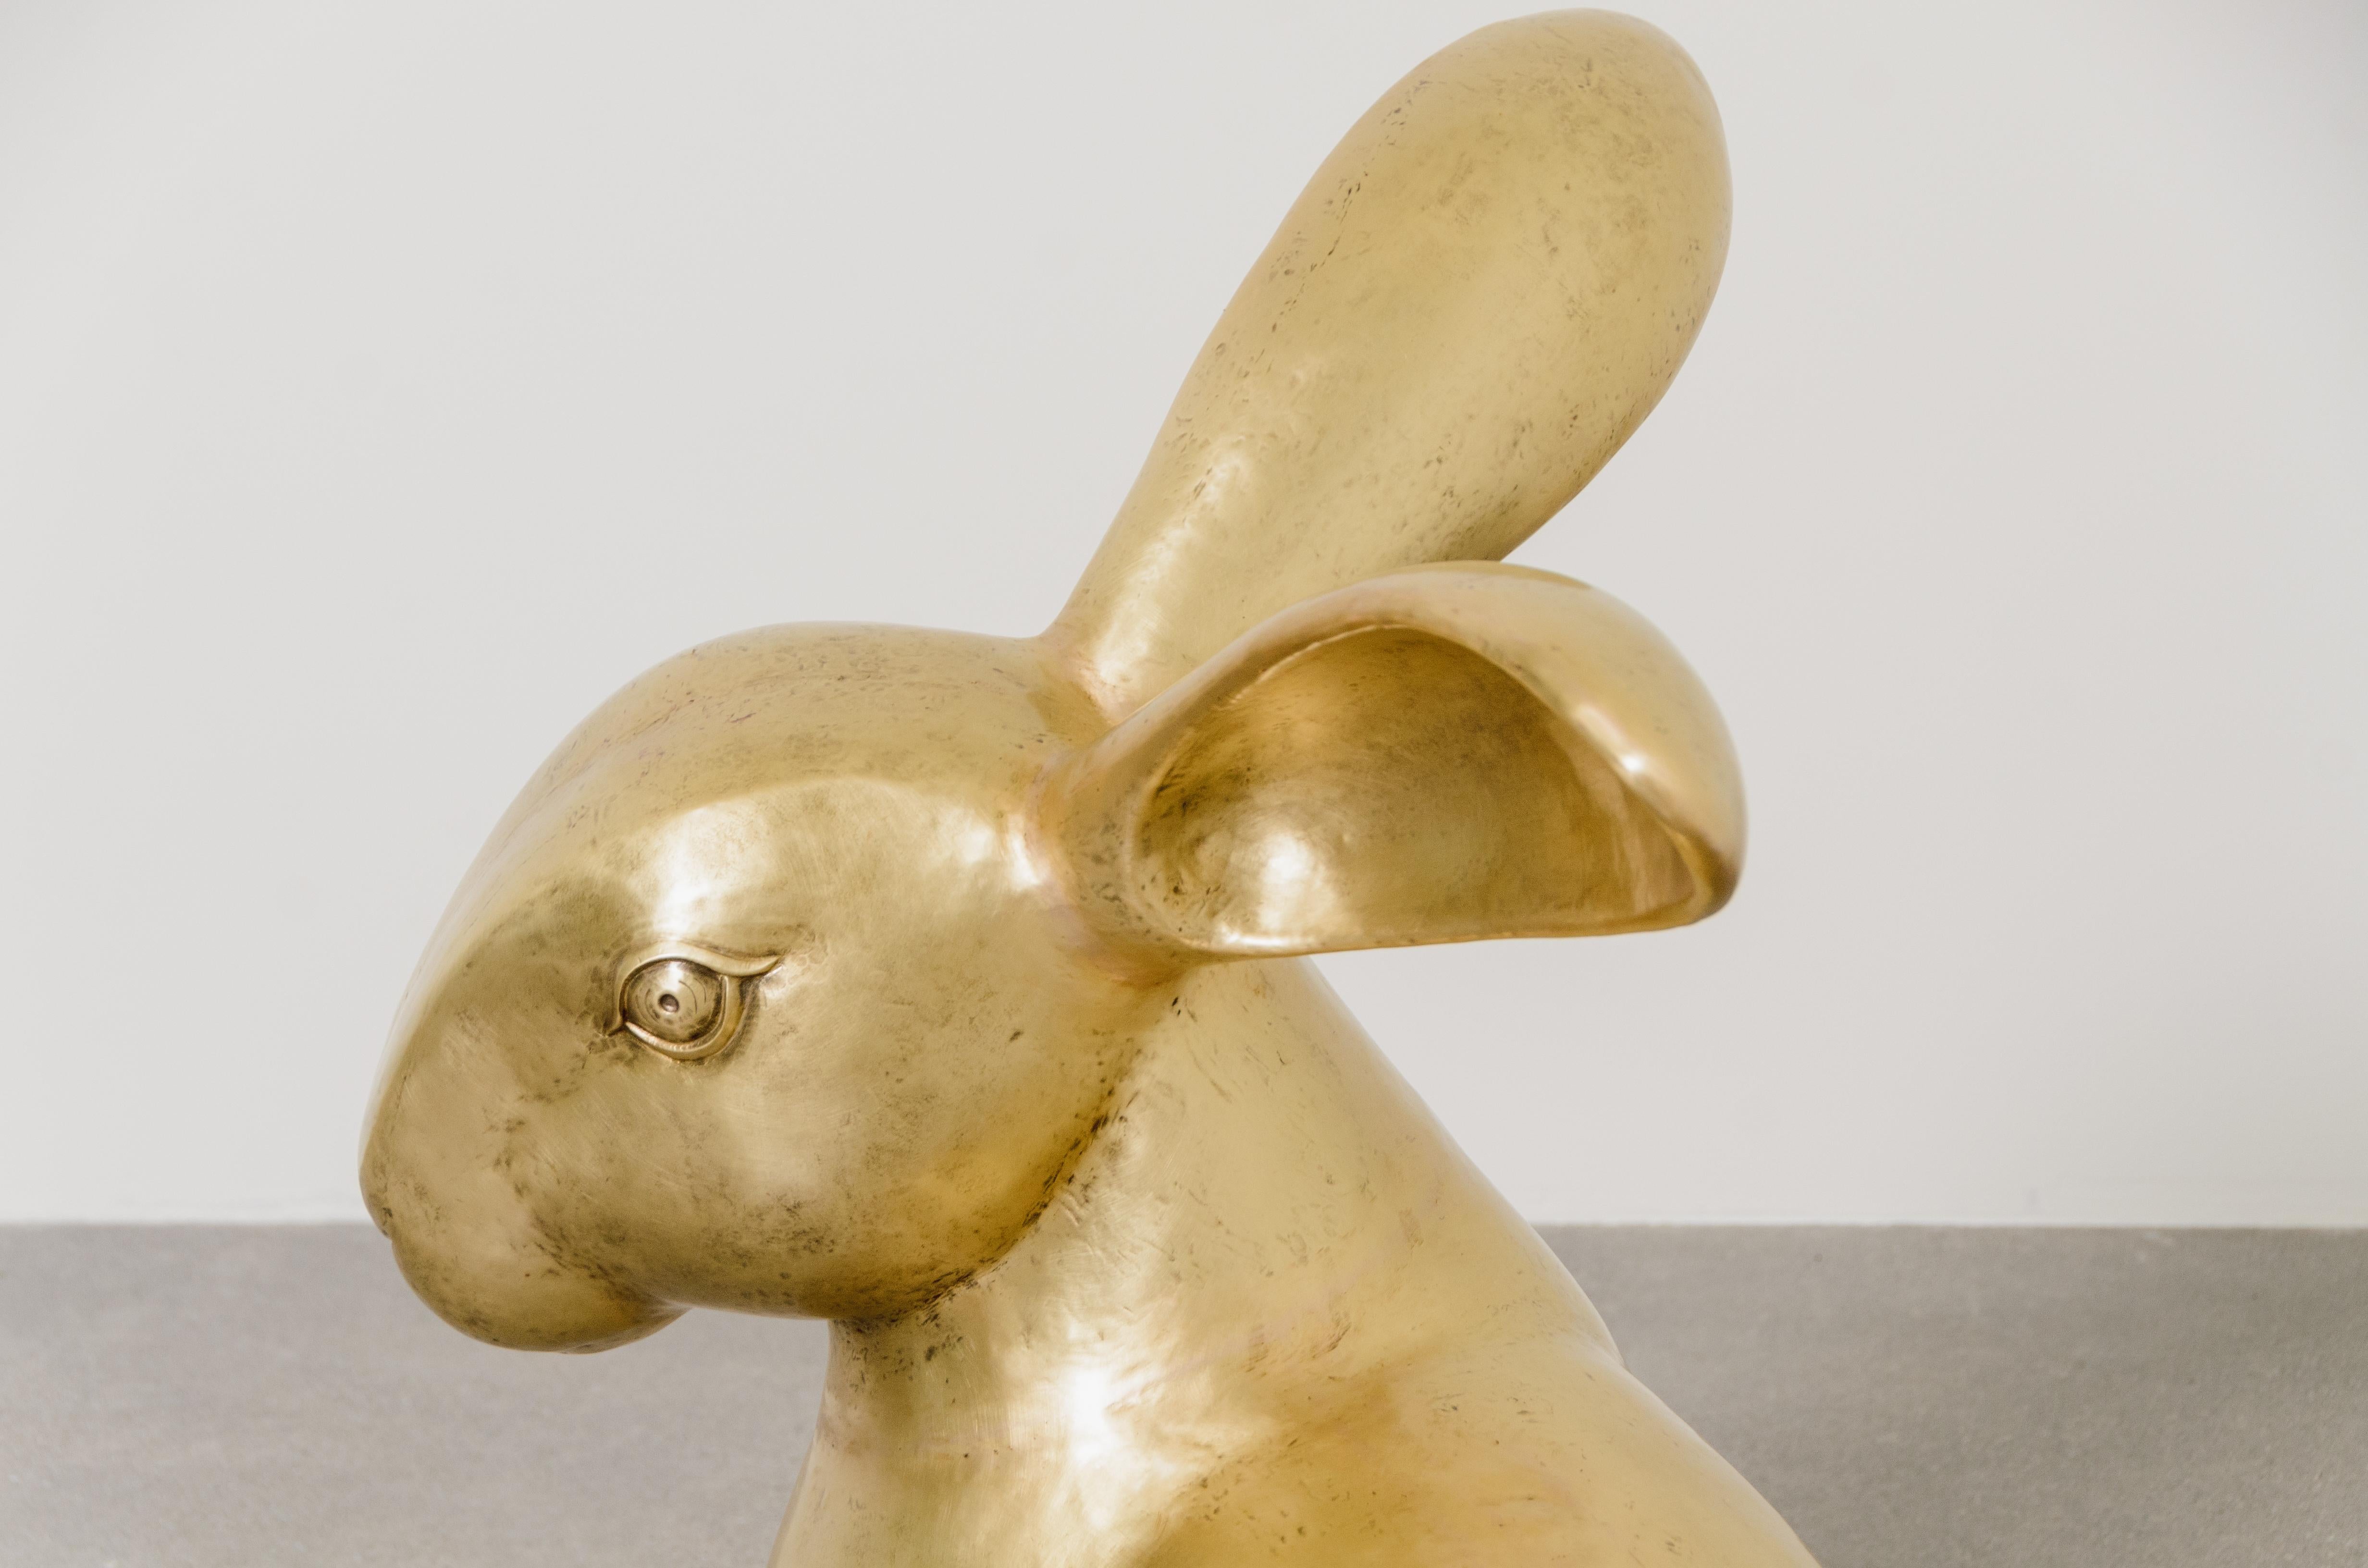 Contemporary Rabbit Sculpture in Brass by Robert Kuo, Hand Repoussé, Limited For Sale 2